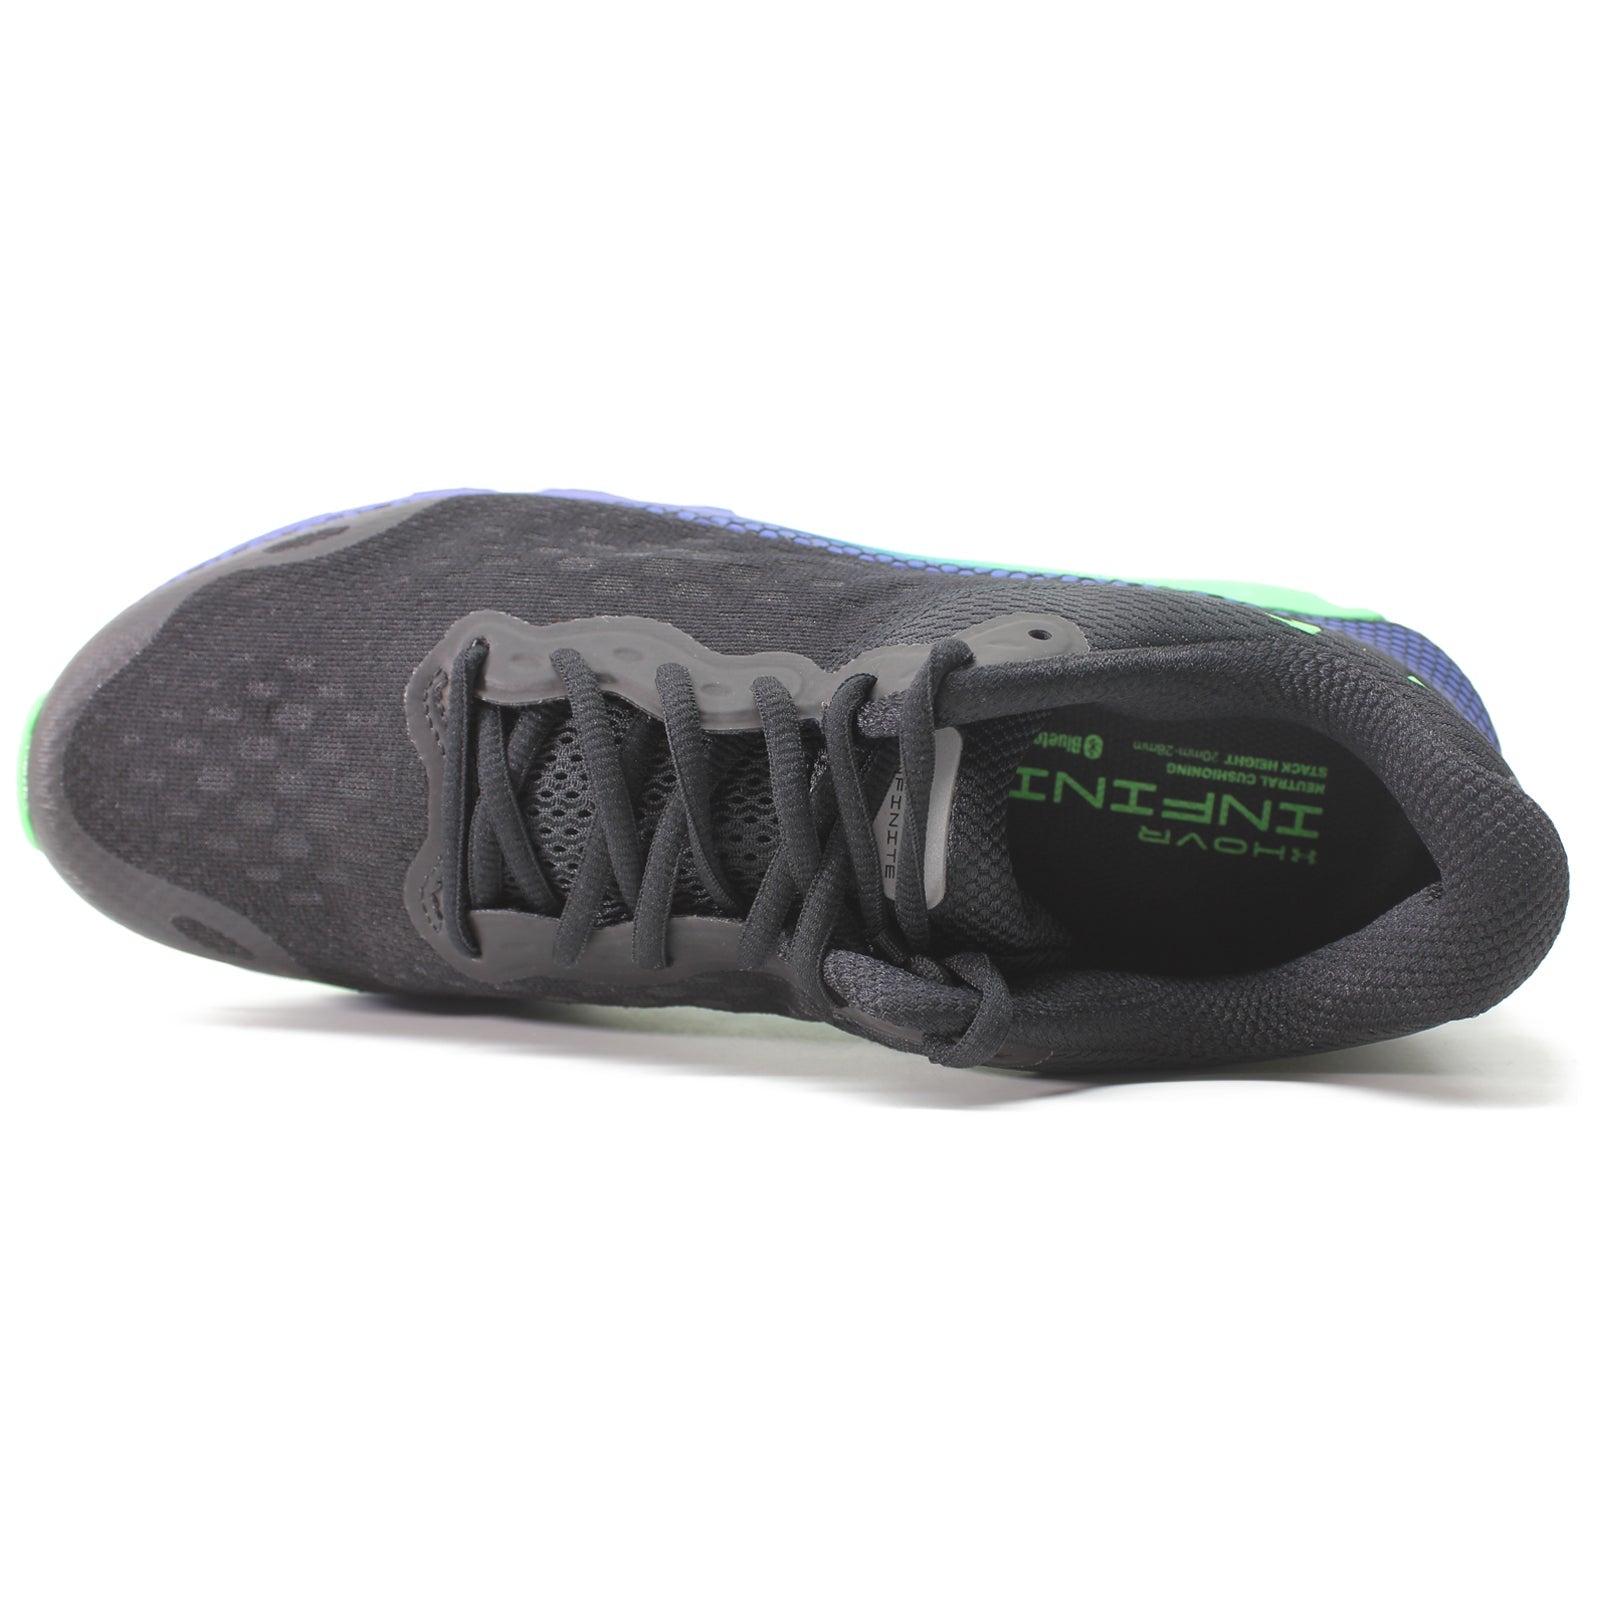 Under Armour HOVR Infinite 3 Synthetic Textile Men's Low-Top Sneakers#color_black green